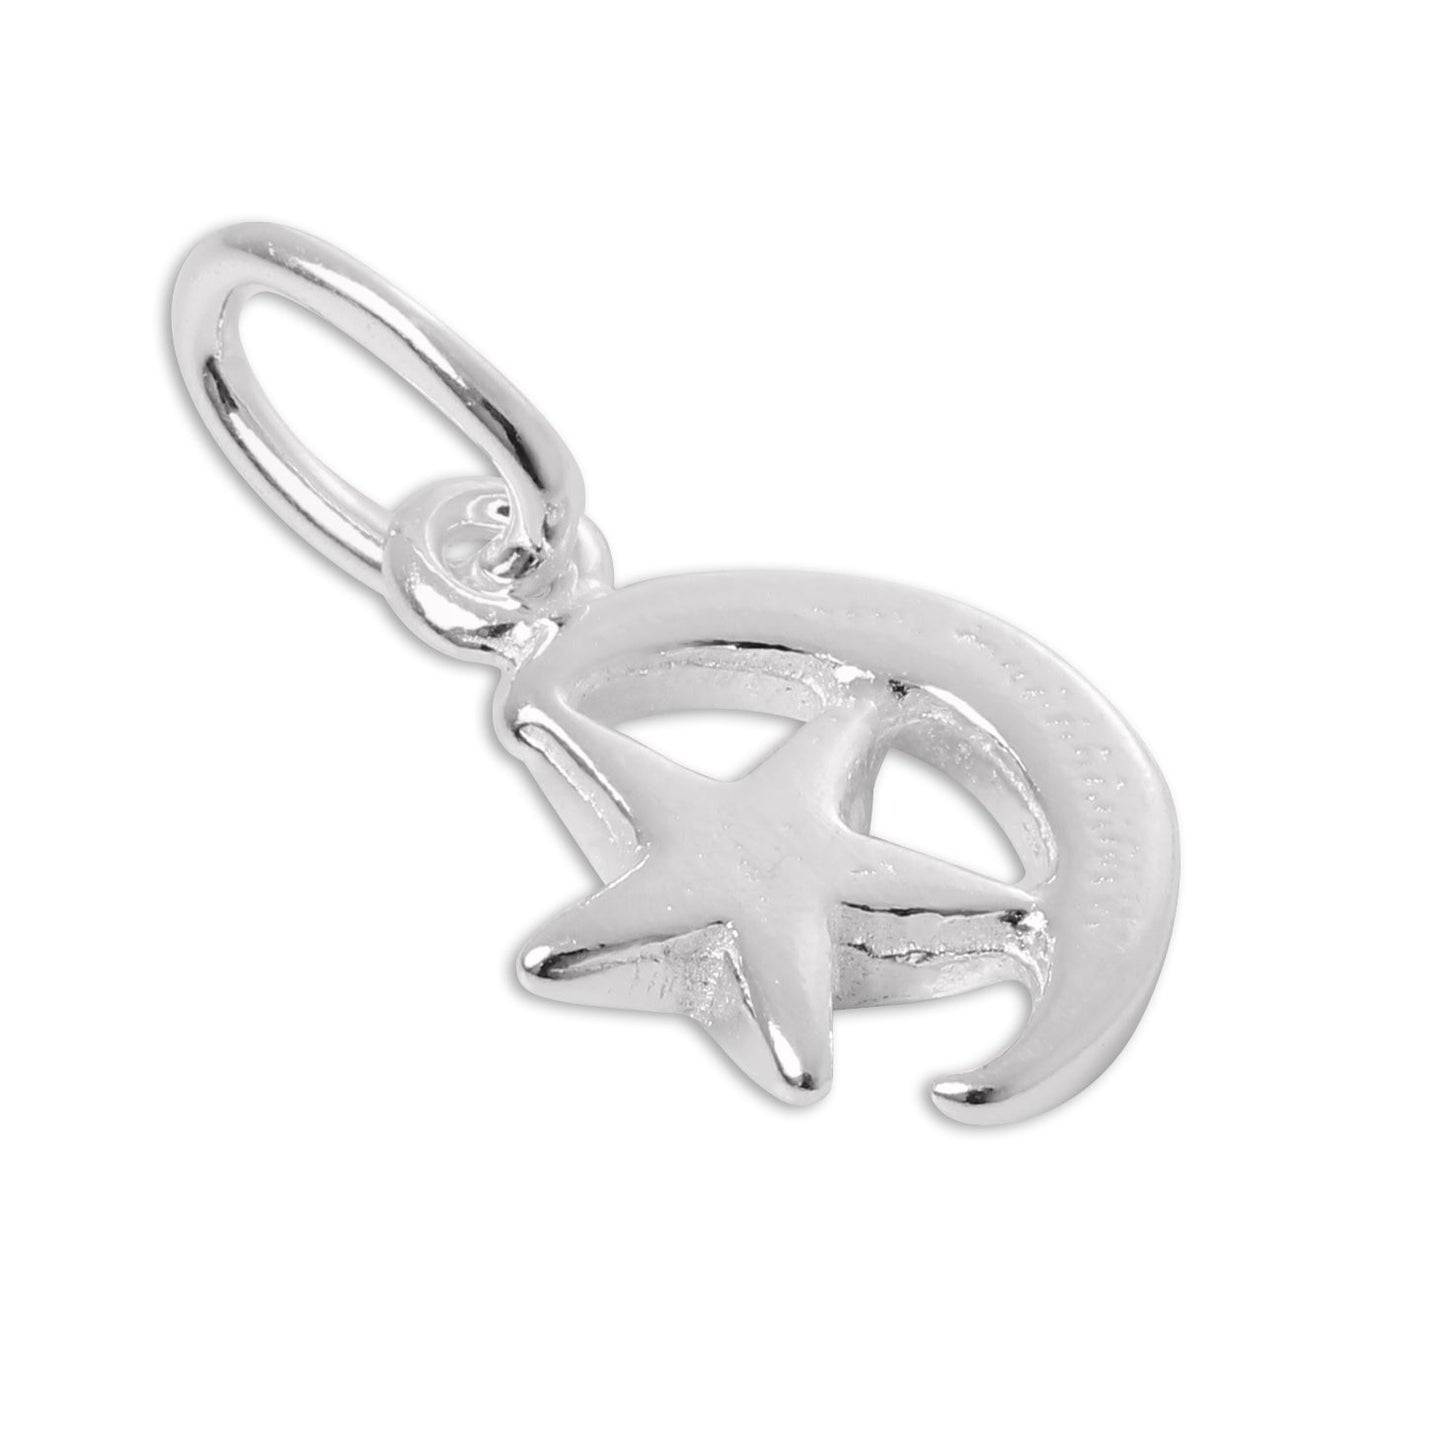 Tiny Sterling Silver Crescent Moon & Star Charm